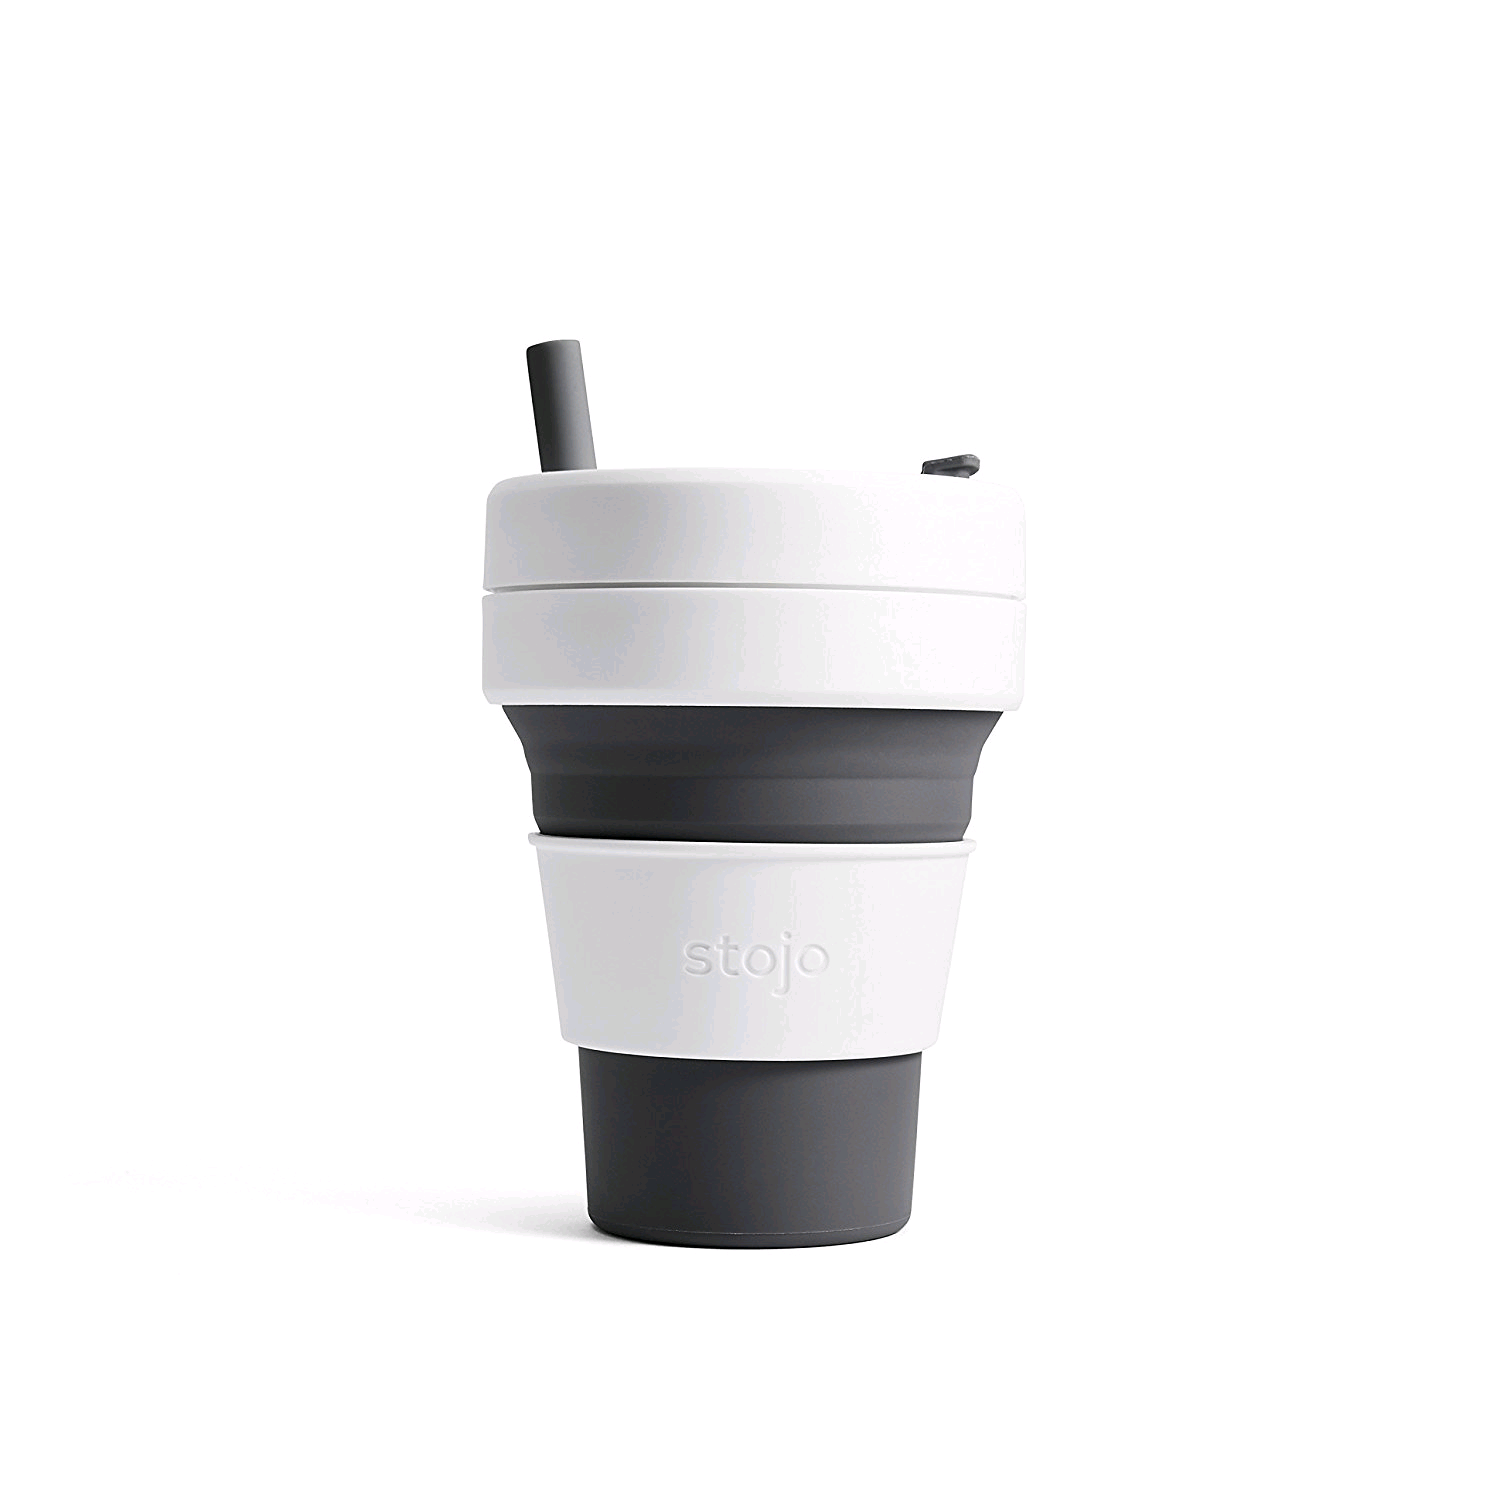 STOJO S2-SLT Silicone Collapsible Coffee Cup 16oz Slate